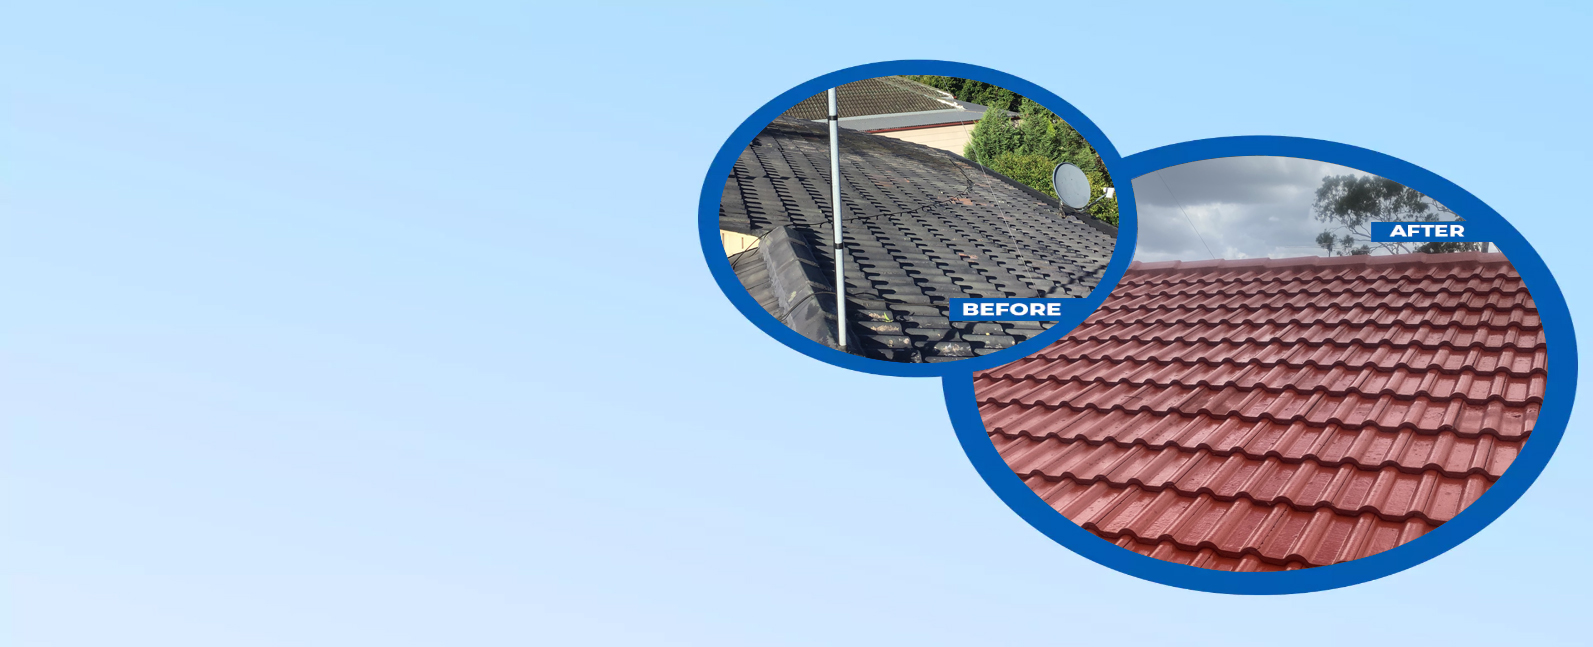 Why Should You Go for Heat Reflective Roof Paints?